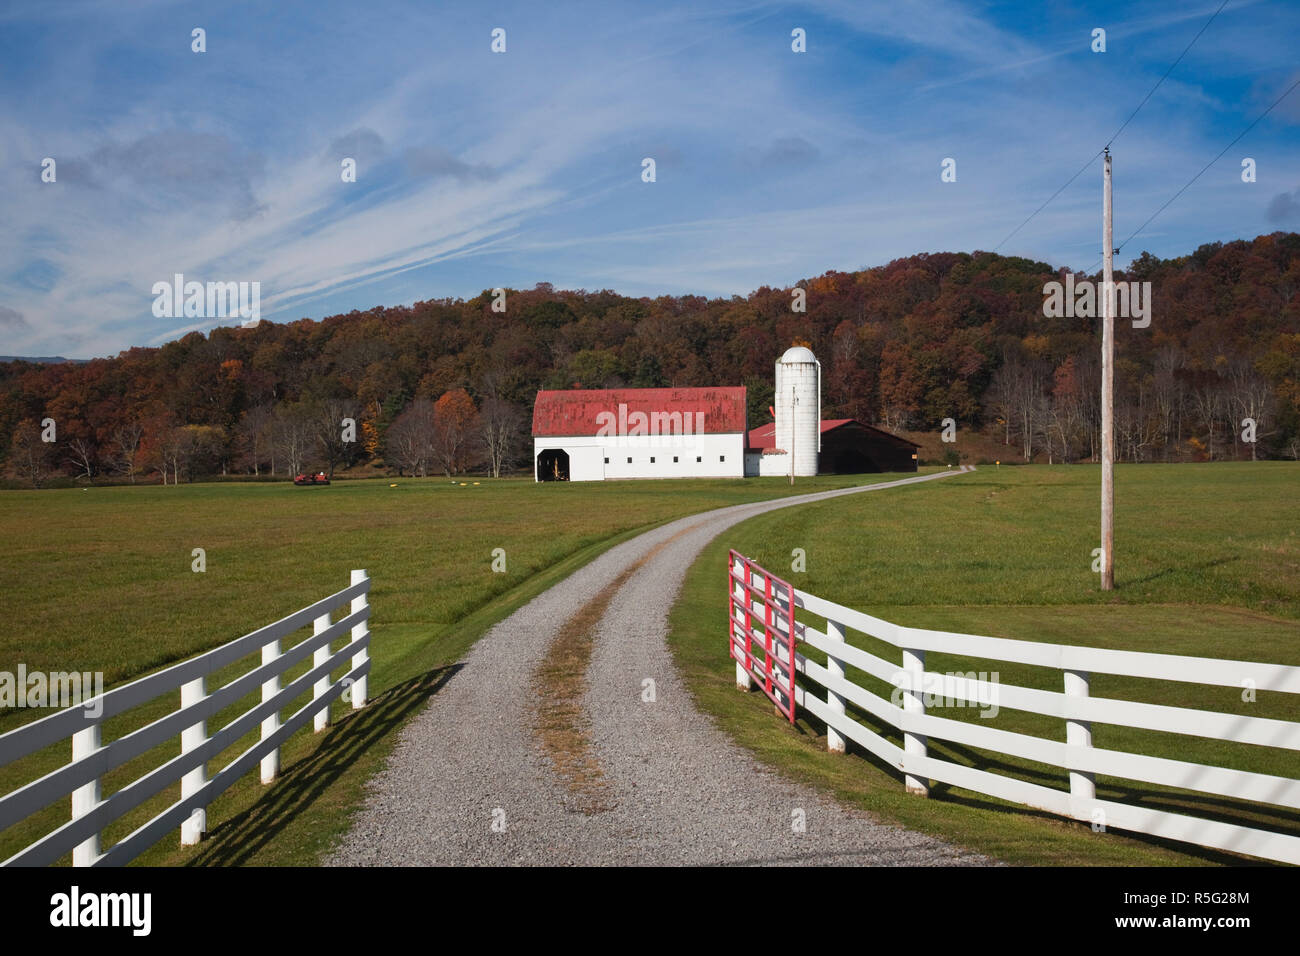 USA, West Virginia, Arbovale, Monongahela National Forest, old barn Stock Photo